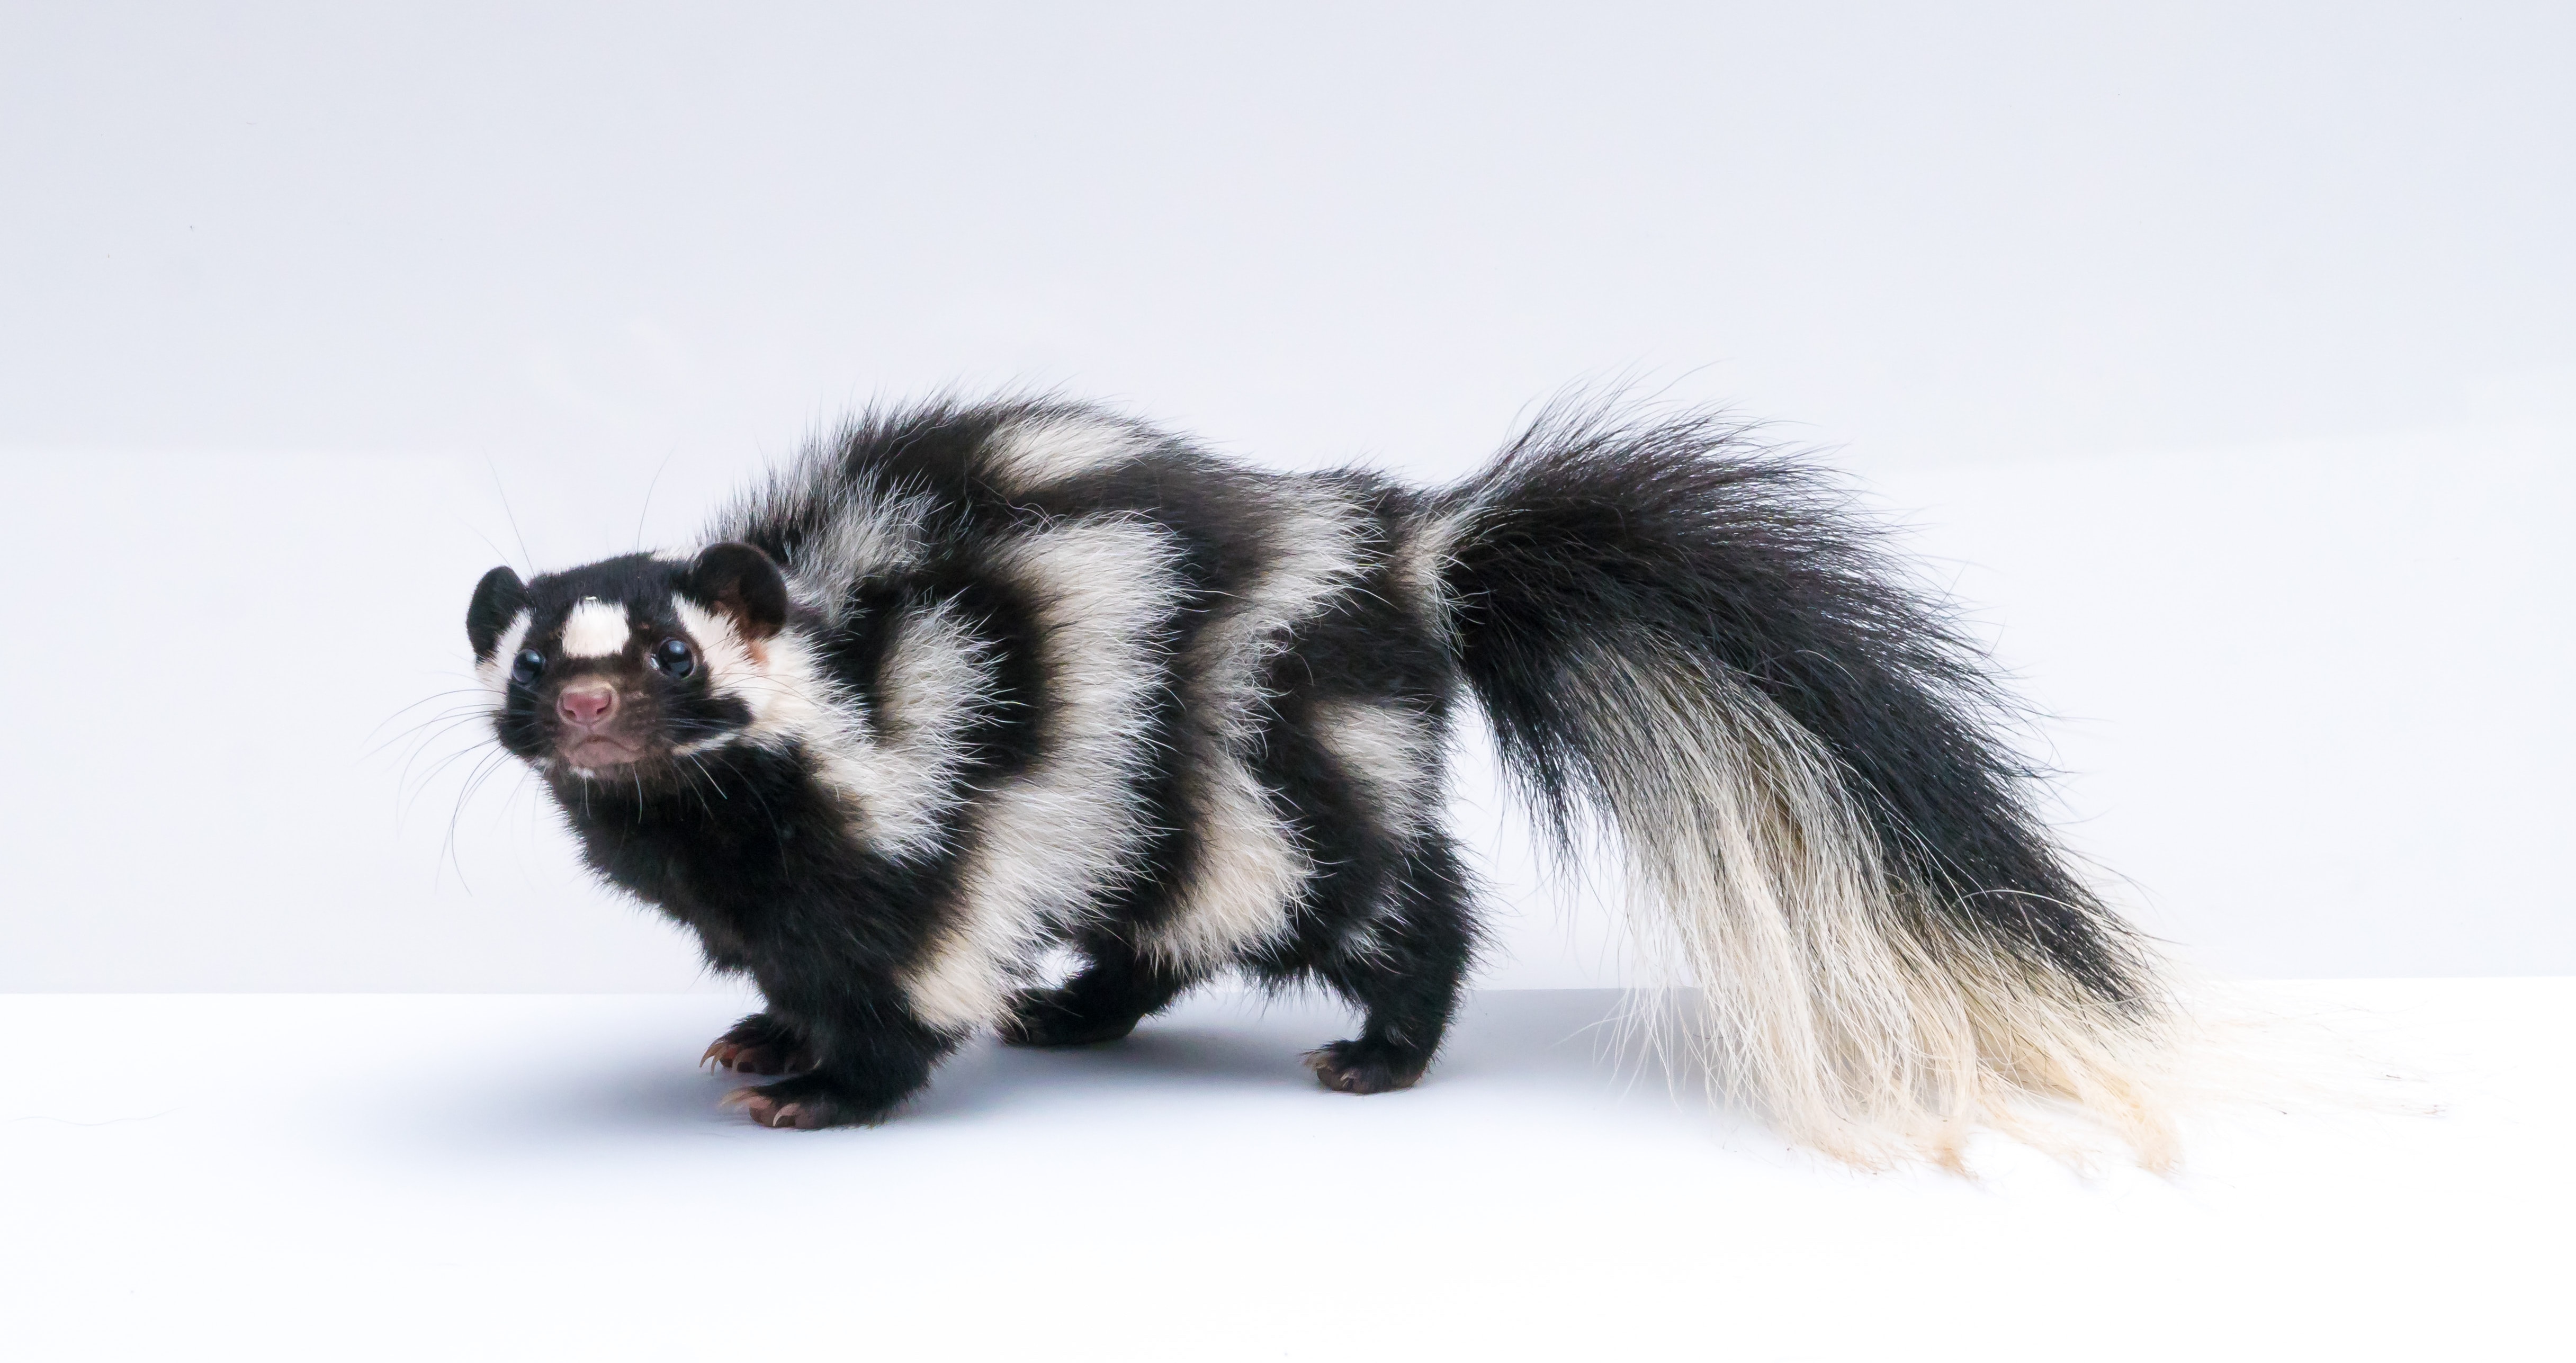 Skunk Picture. Download Free Image